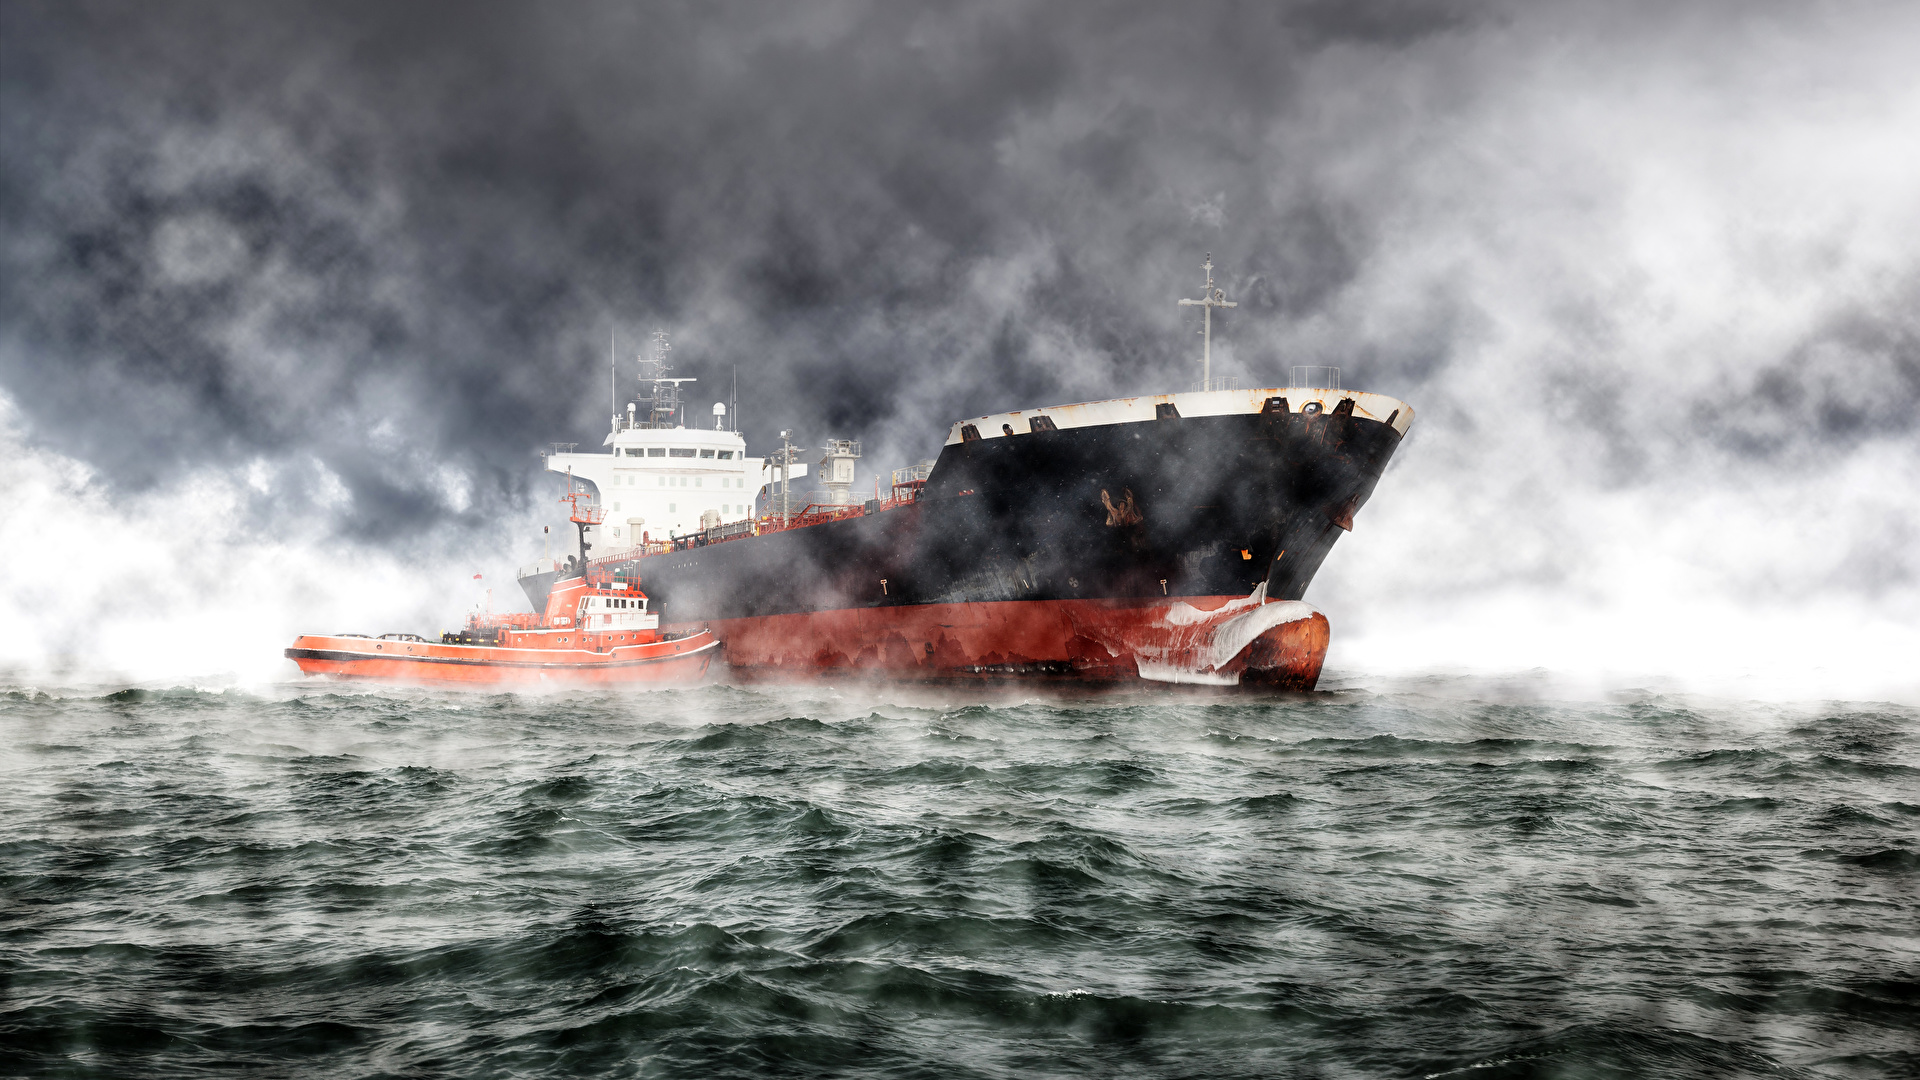 828187 Ships, Sea, Waves, Clouds - Rare Gallery HD Wallpapers